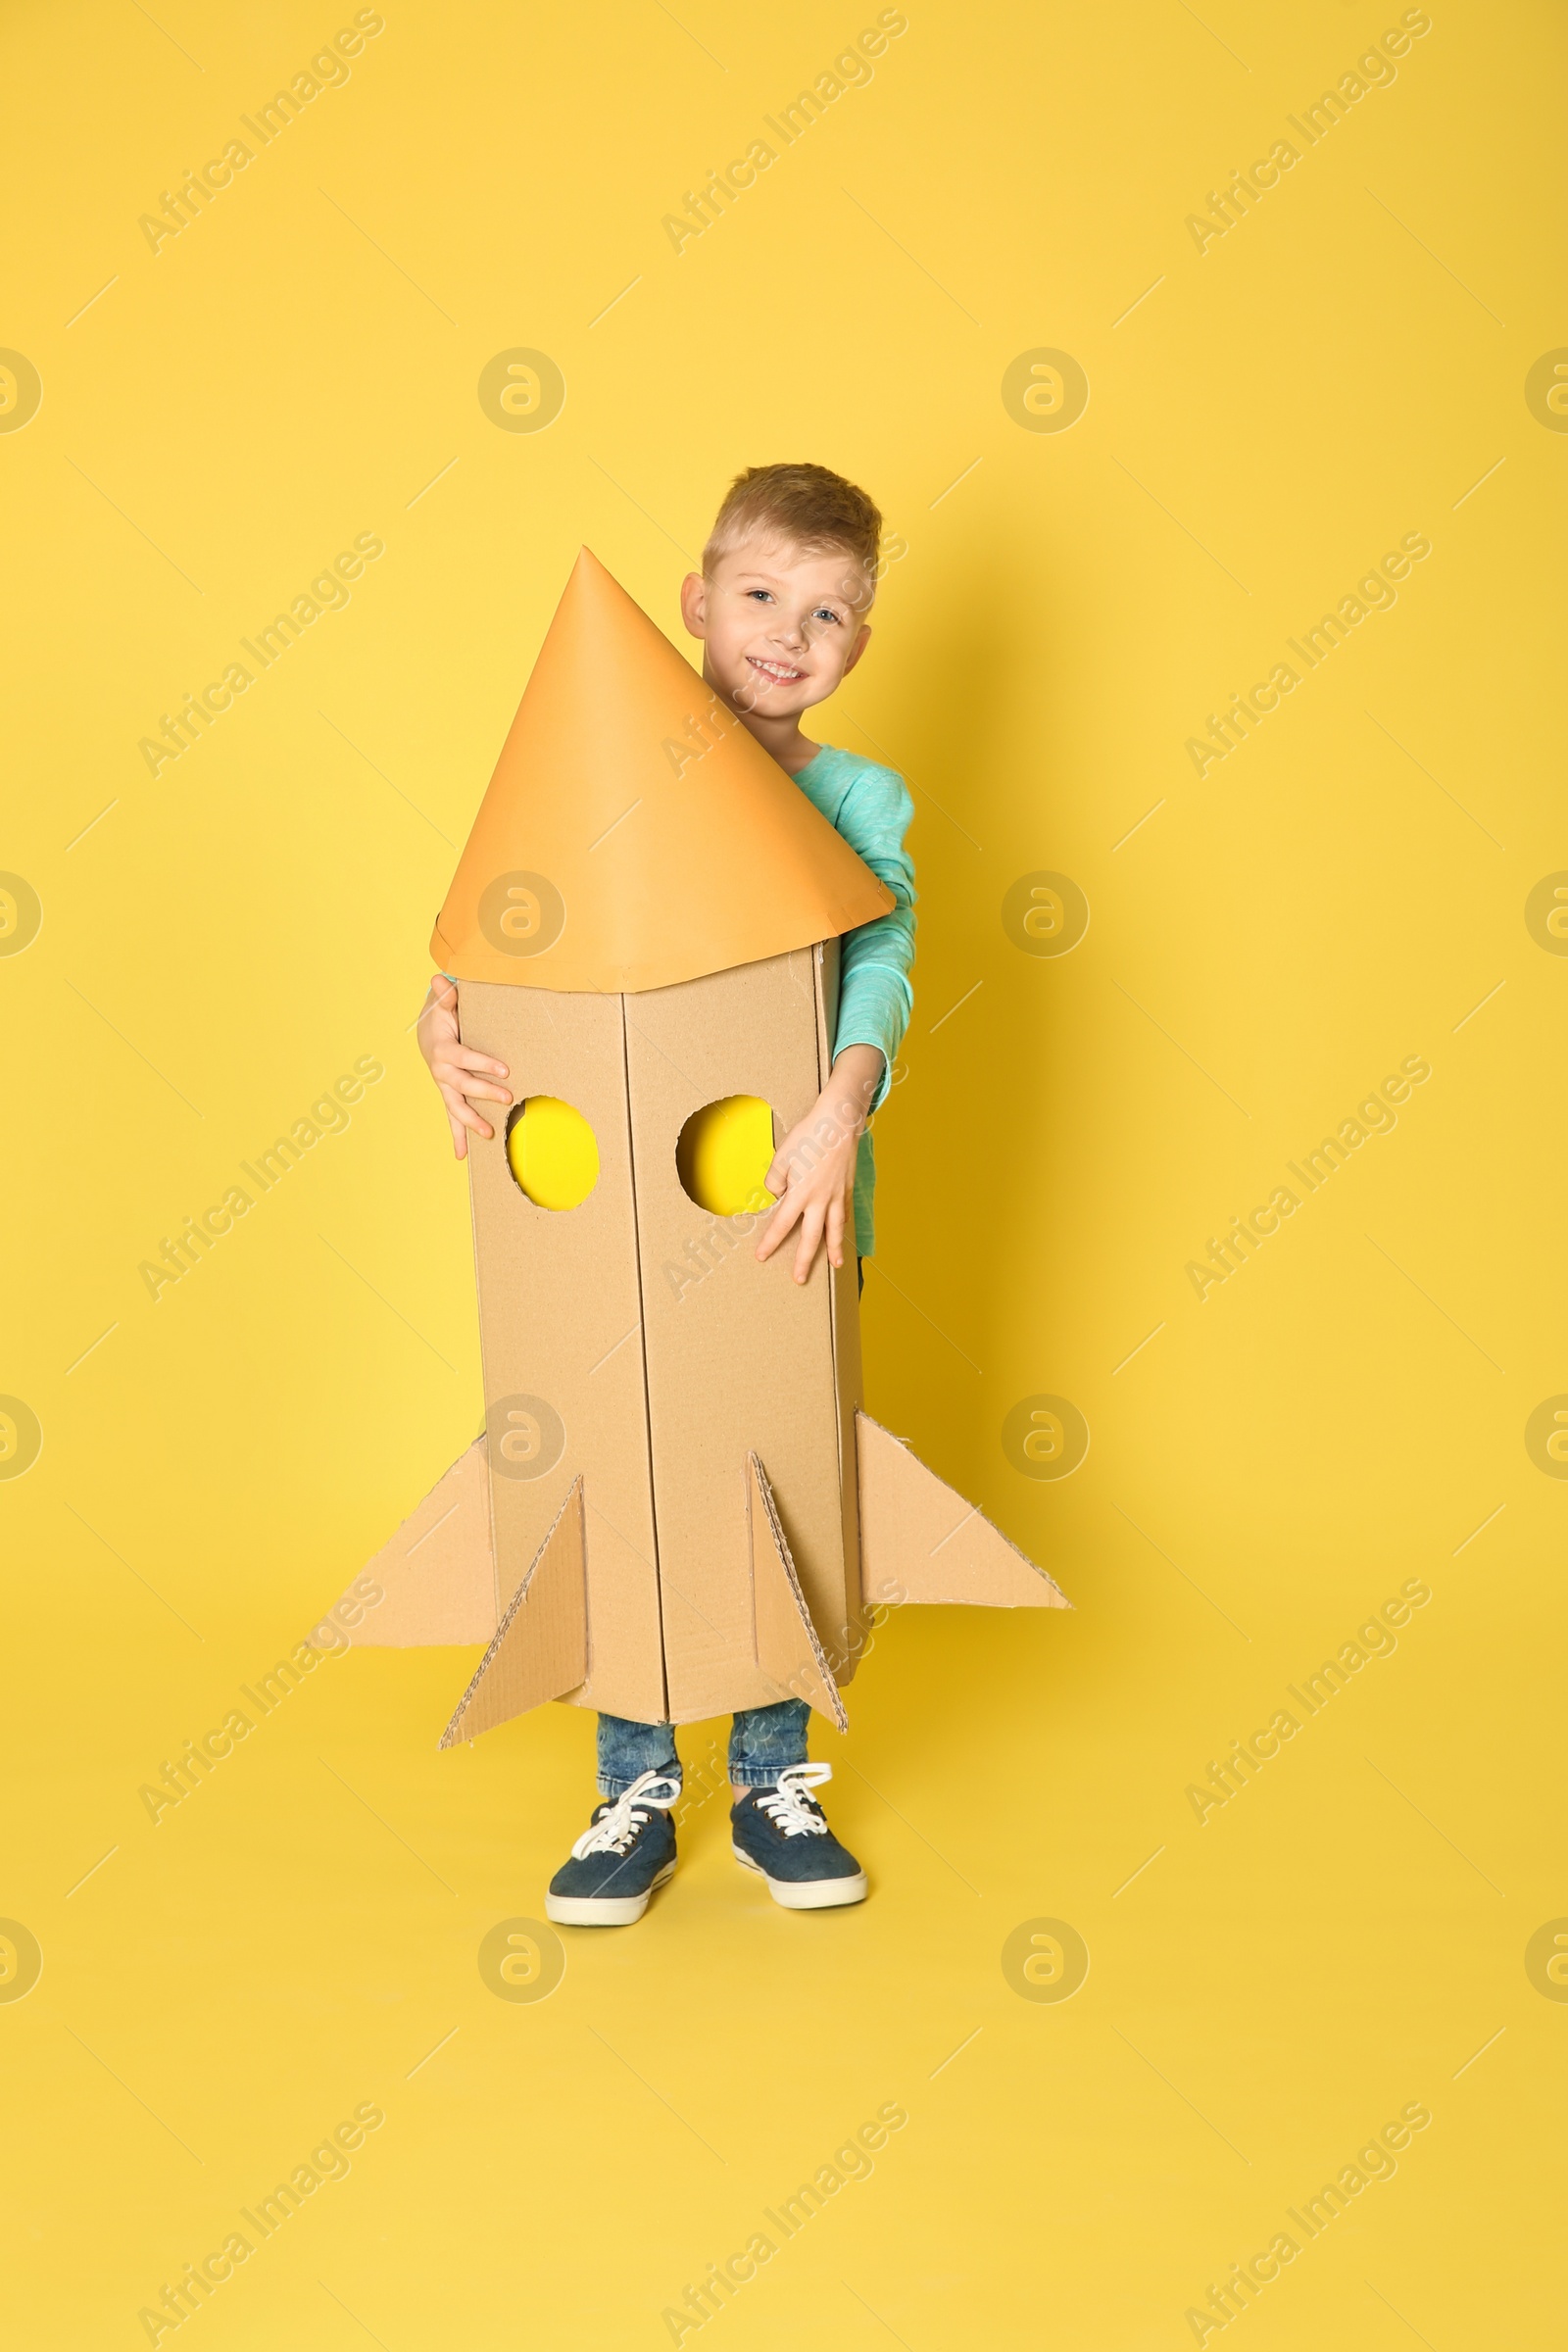 Photo of Little child playing with rocket made of cardboard box on yellow background